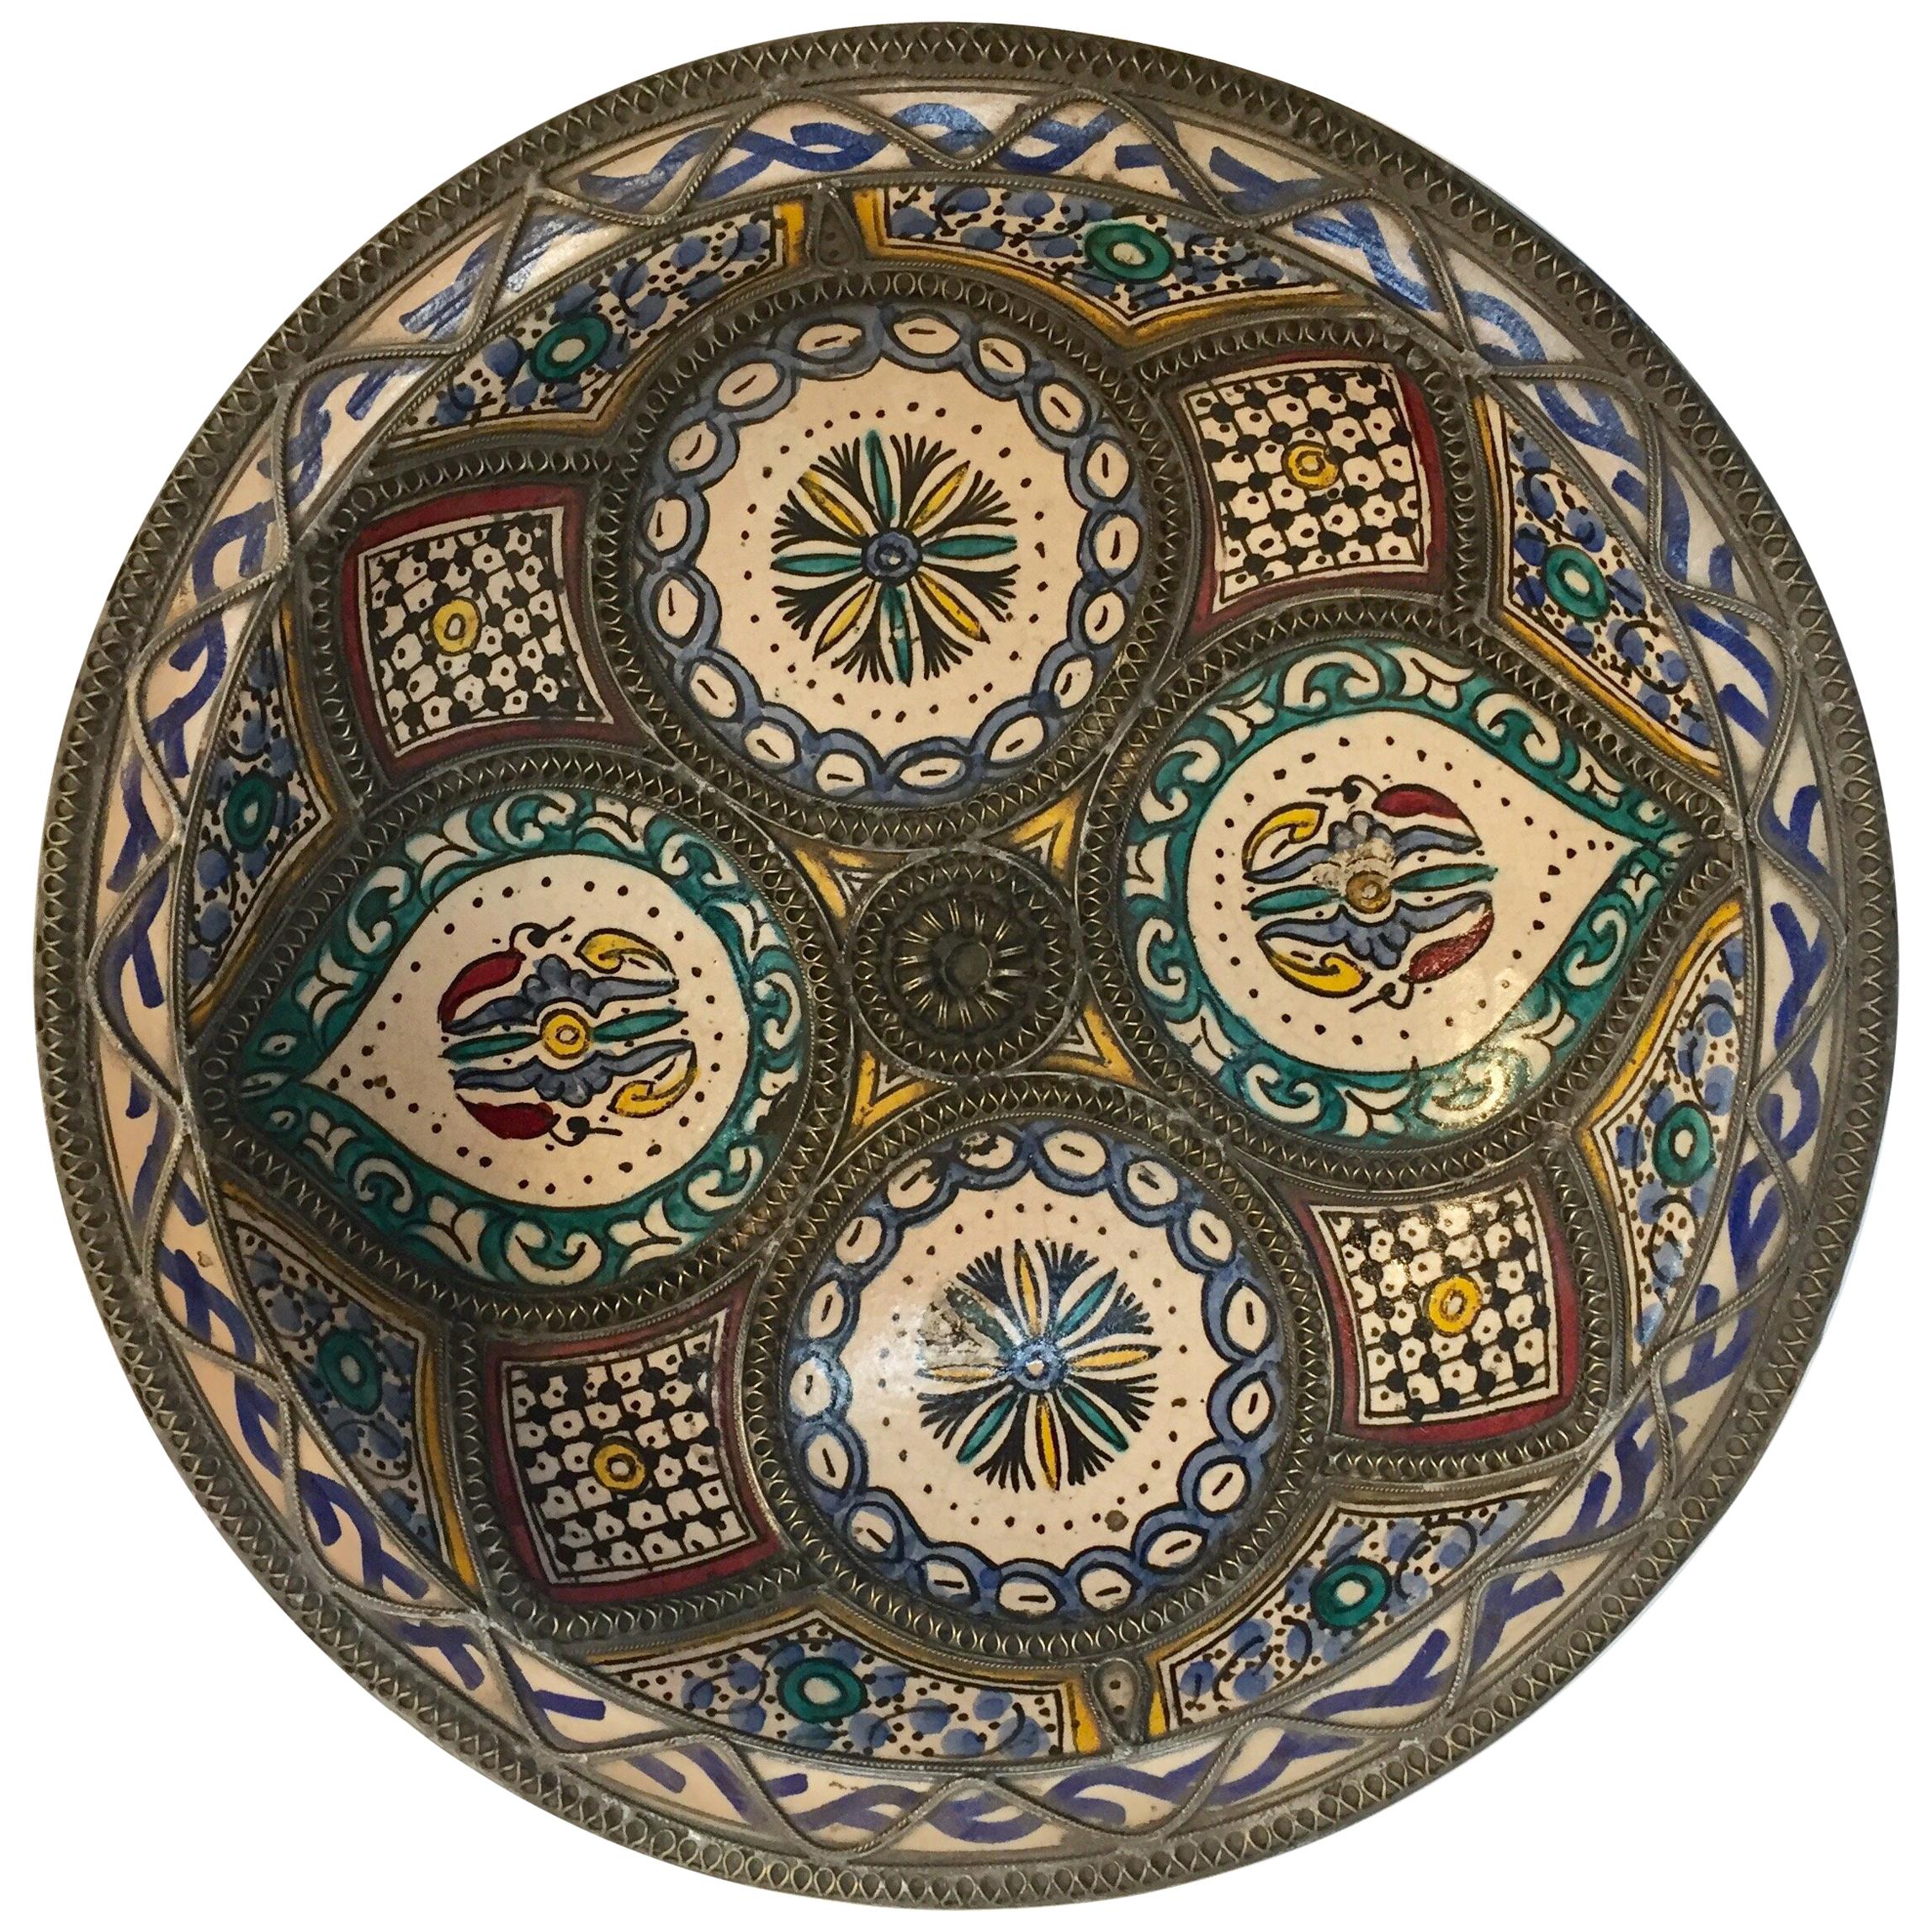 Decorative Moroccan Handcrafted Ceramic Bowl from Fez